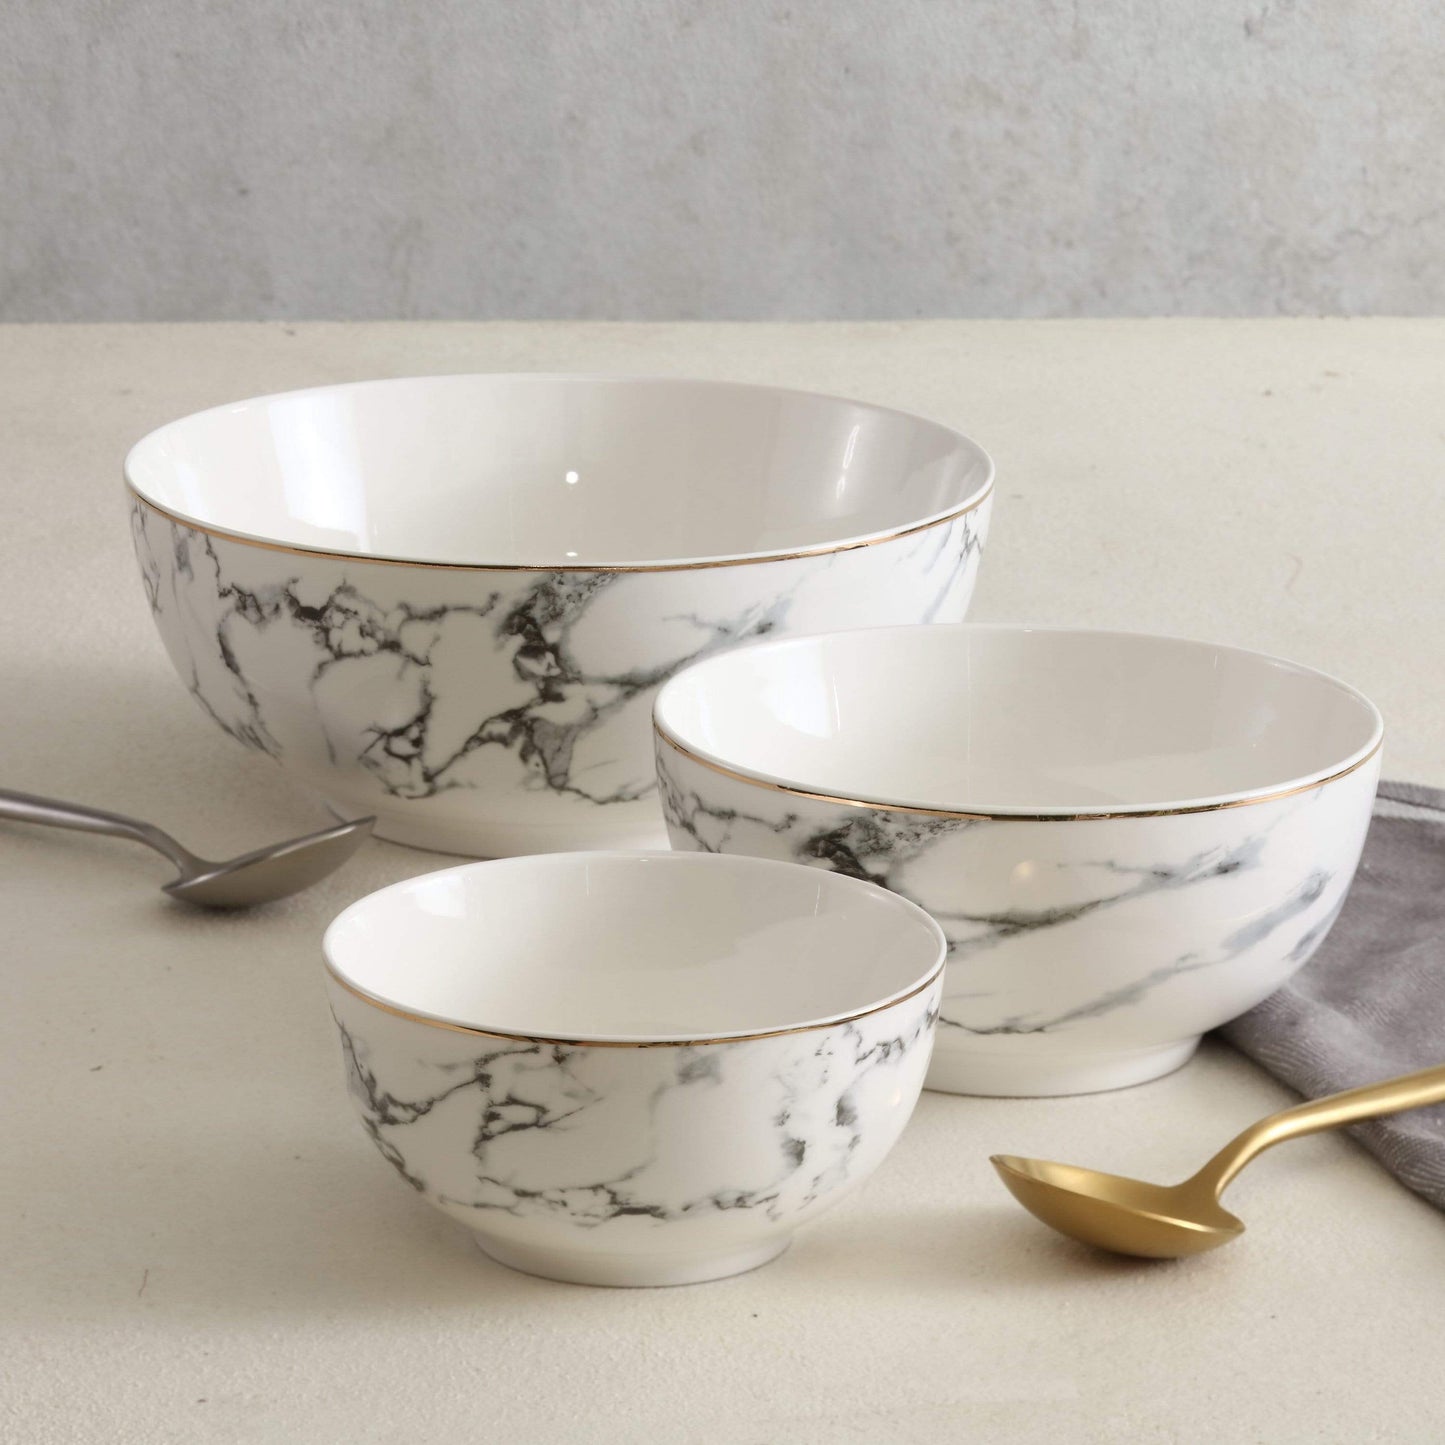 Marble Bowl - Nordic Side - bowls, dining